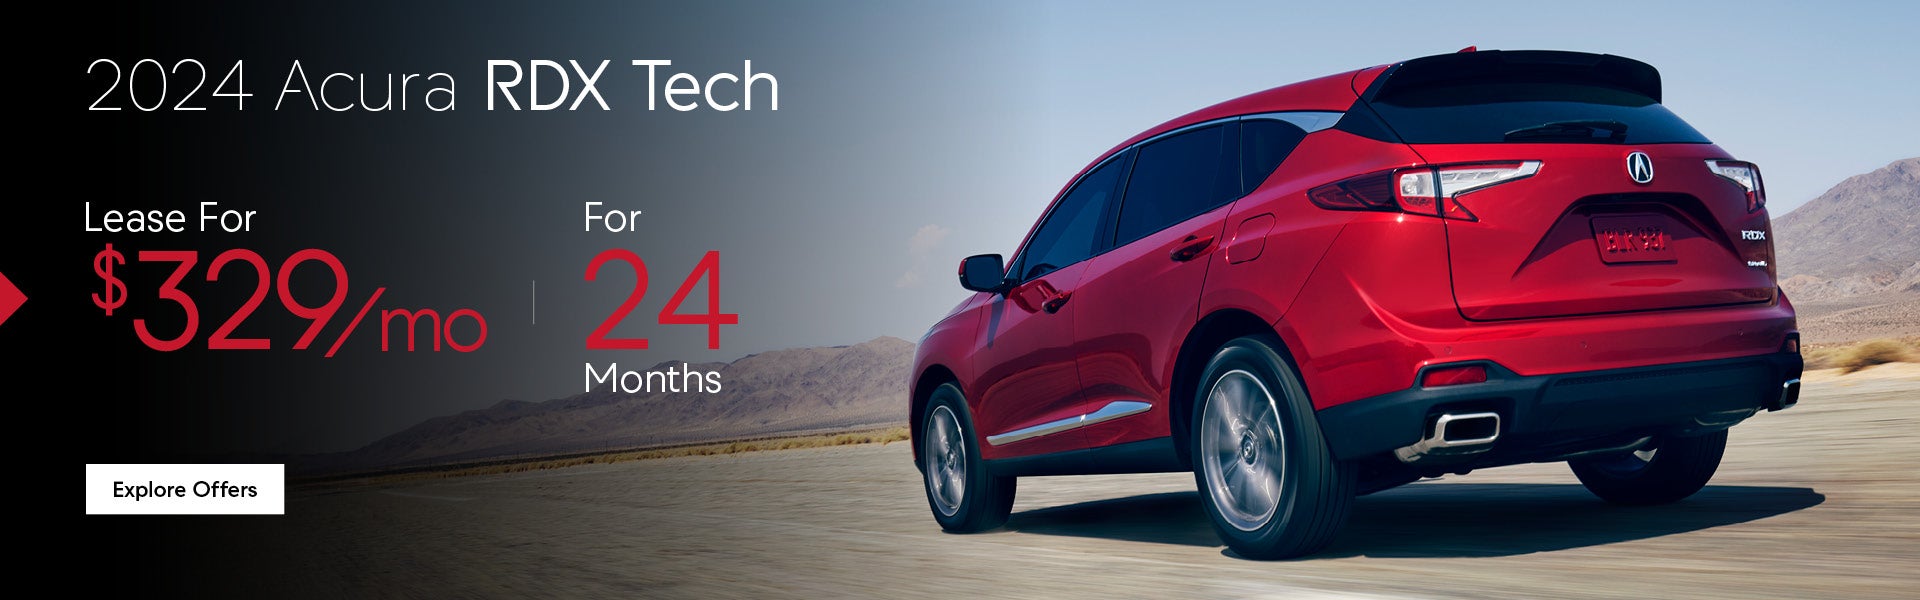 2024 Acura RDX Tech Lease For $329/mo for 24 Months